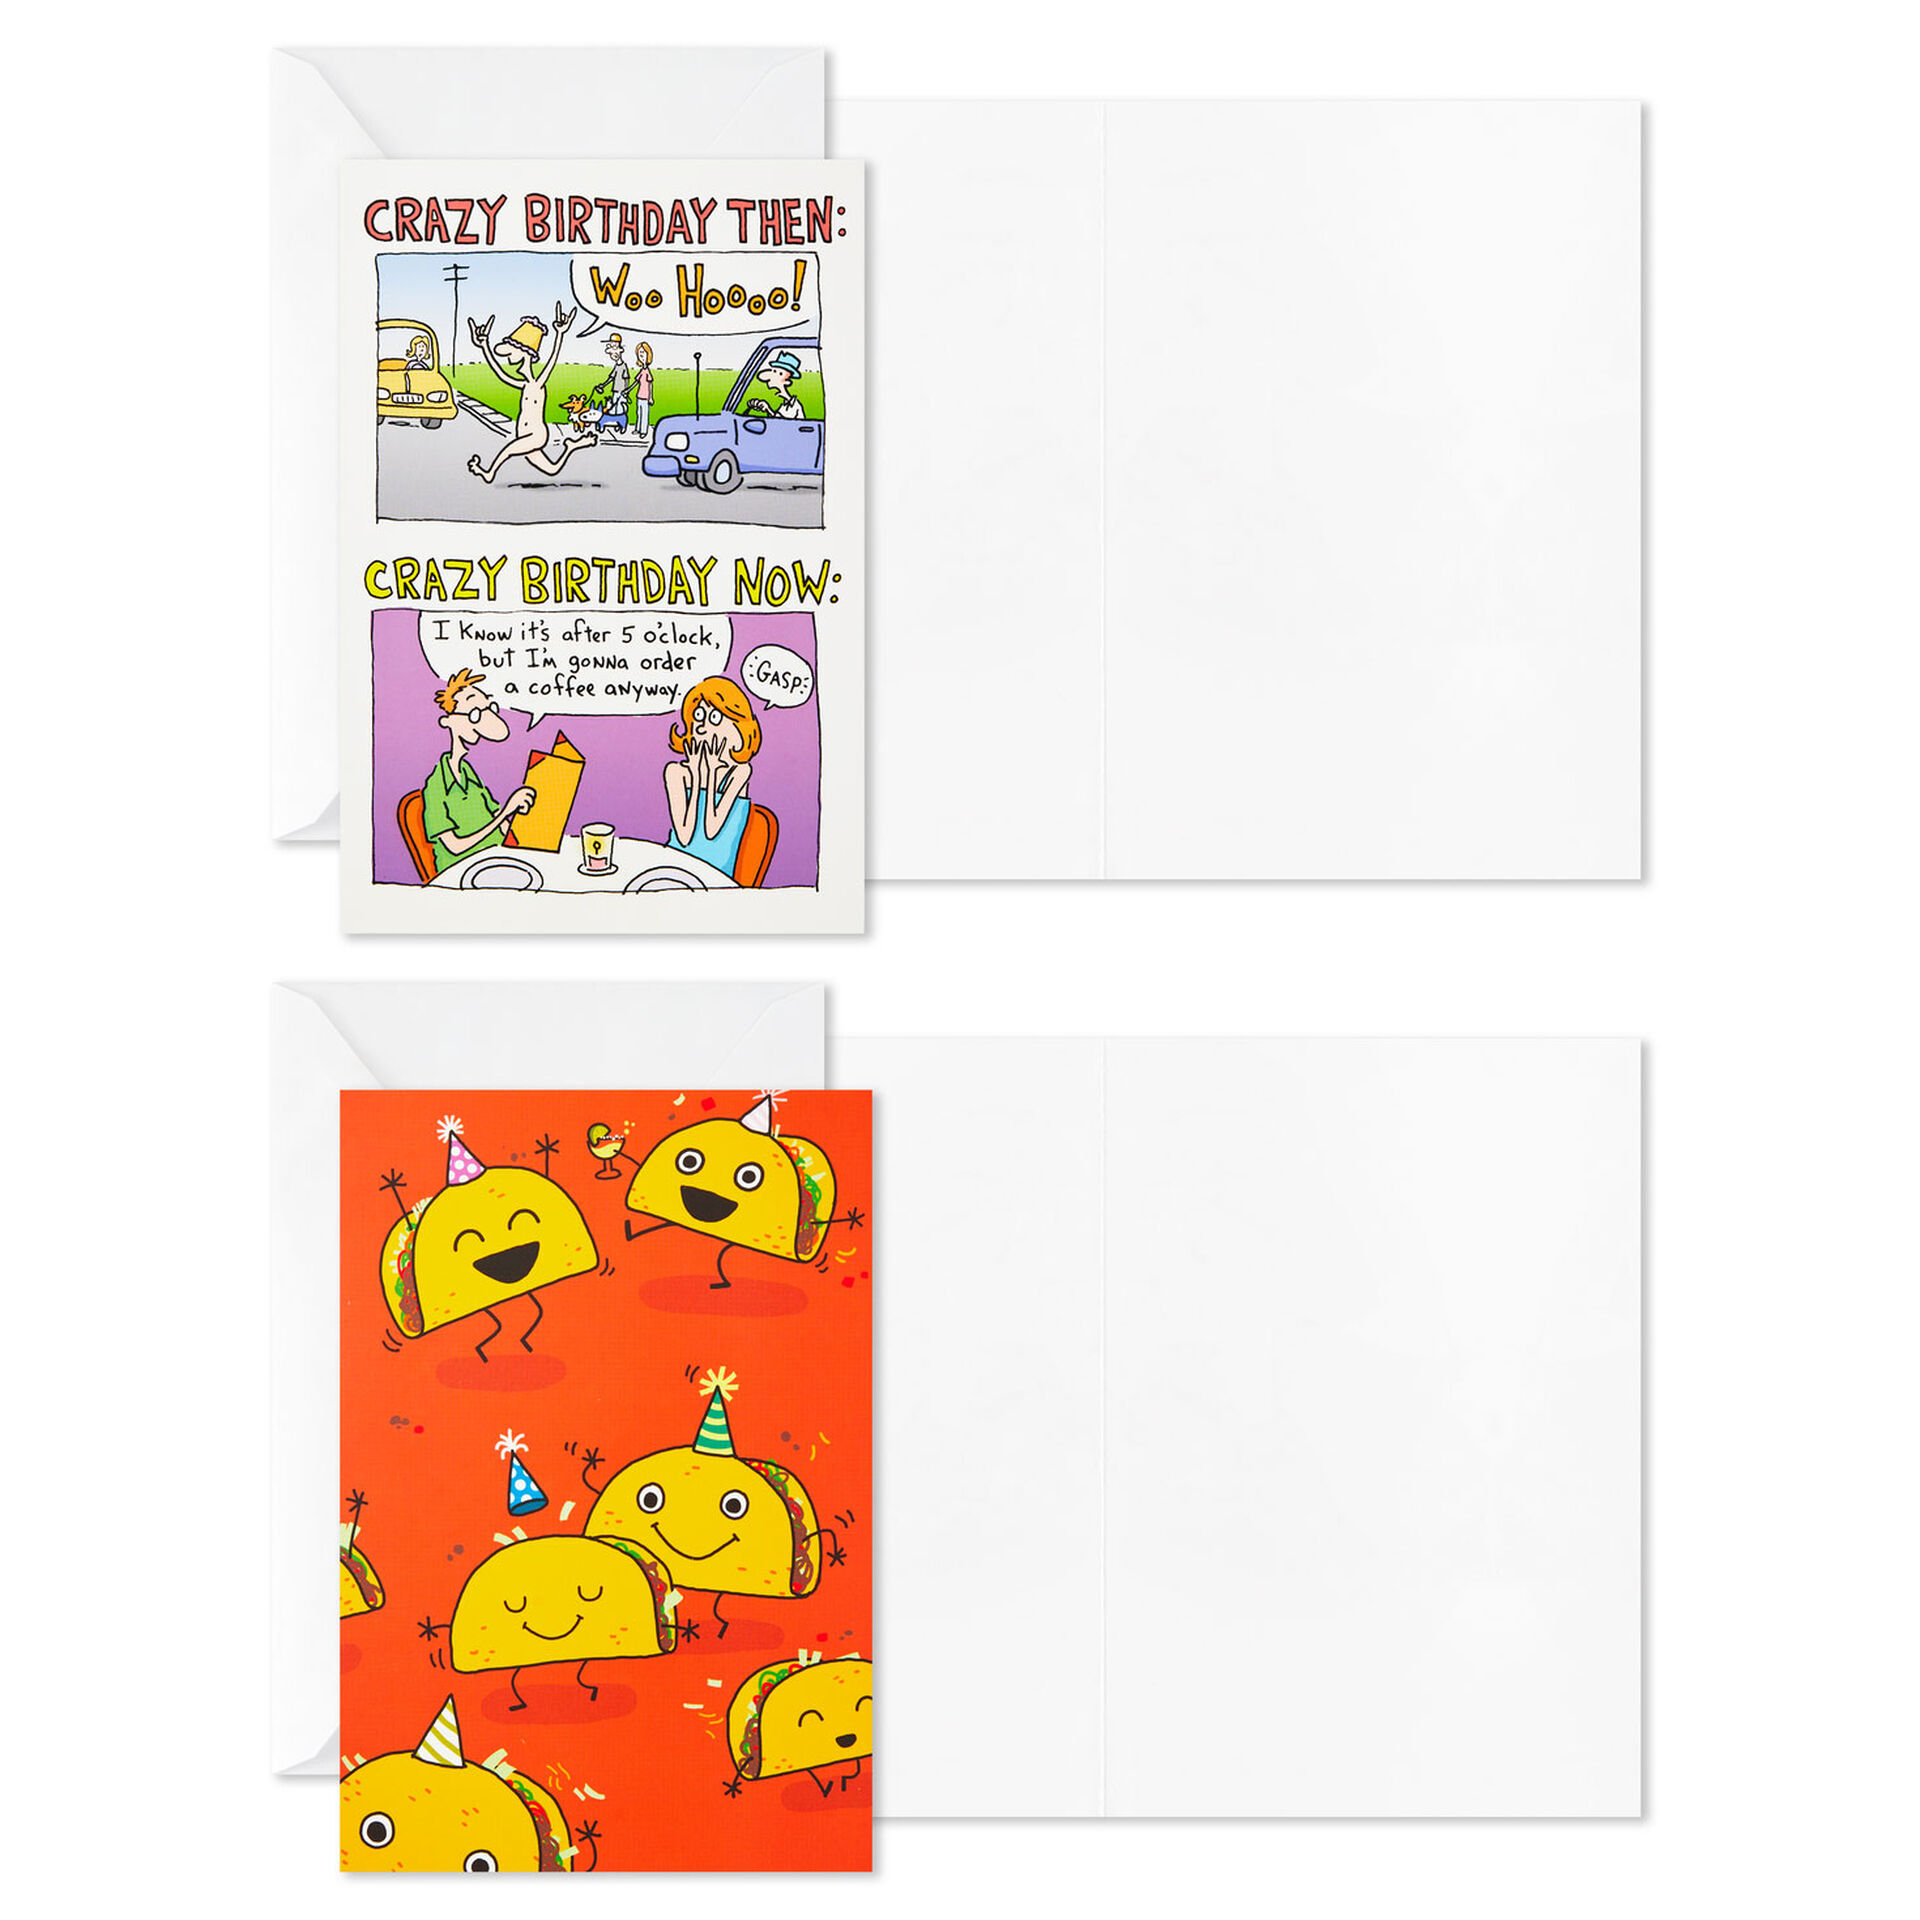 Funny-Assorted-Boxed-Blank-Birthday-Cards_5STZ1069_02